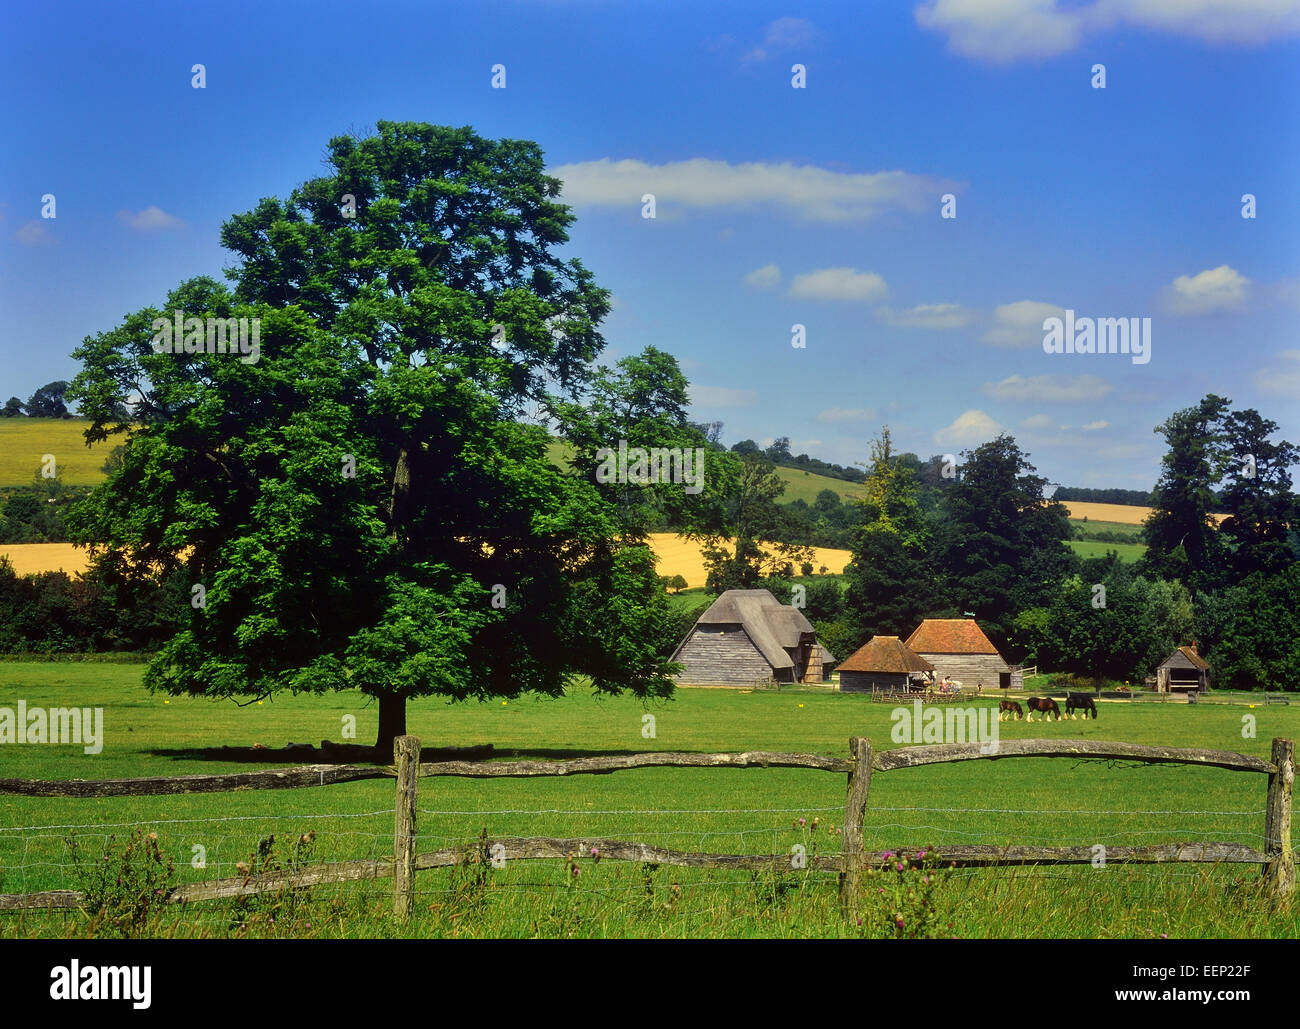 Weald and Downland museo vivente. South Downs. West Sussex. In Inghilterra. Foto Stock